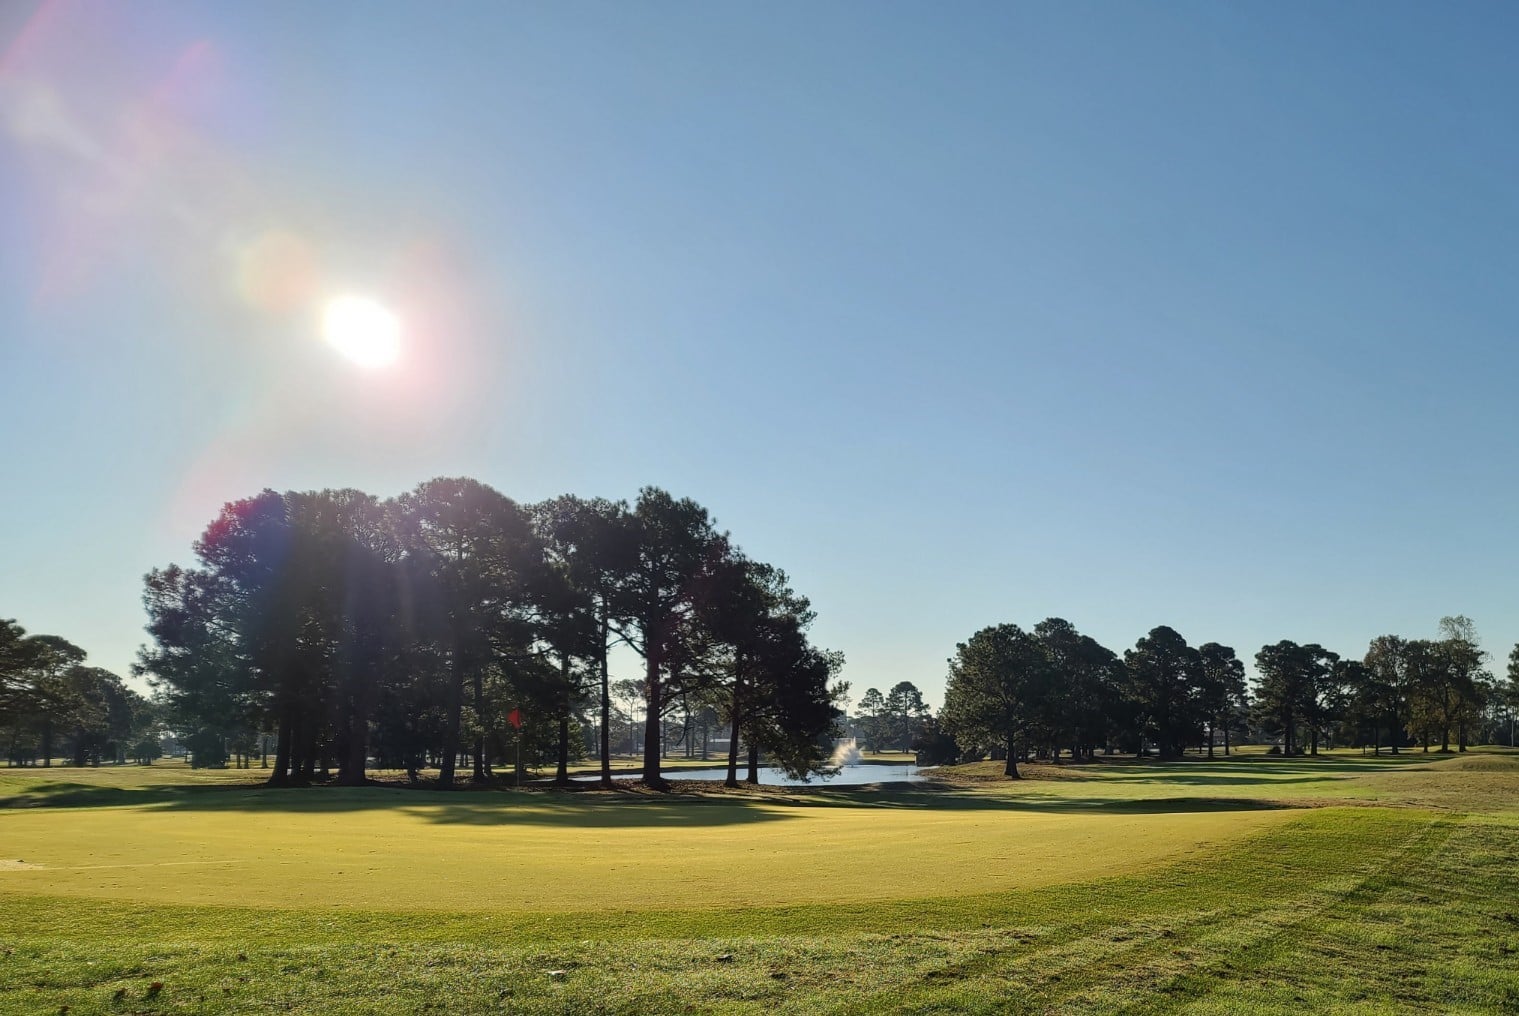 Good Bye to 2020 and Welcome to 2021 for Myrtle Beach golf!